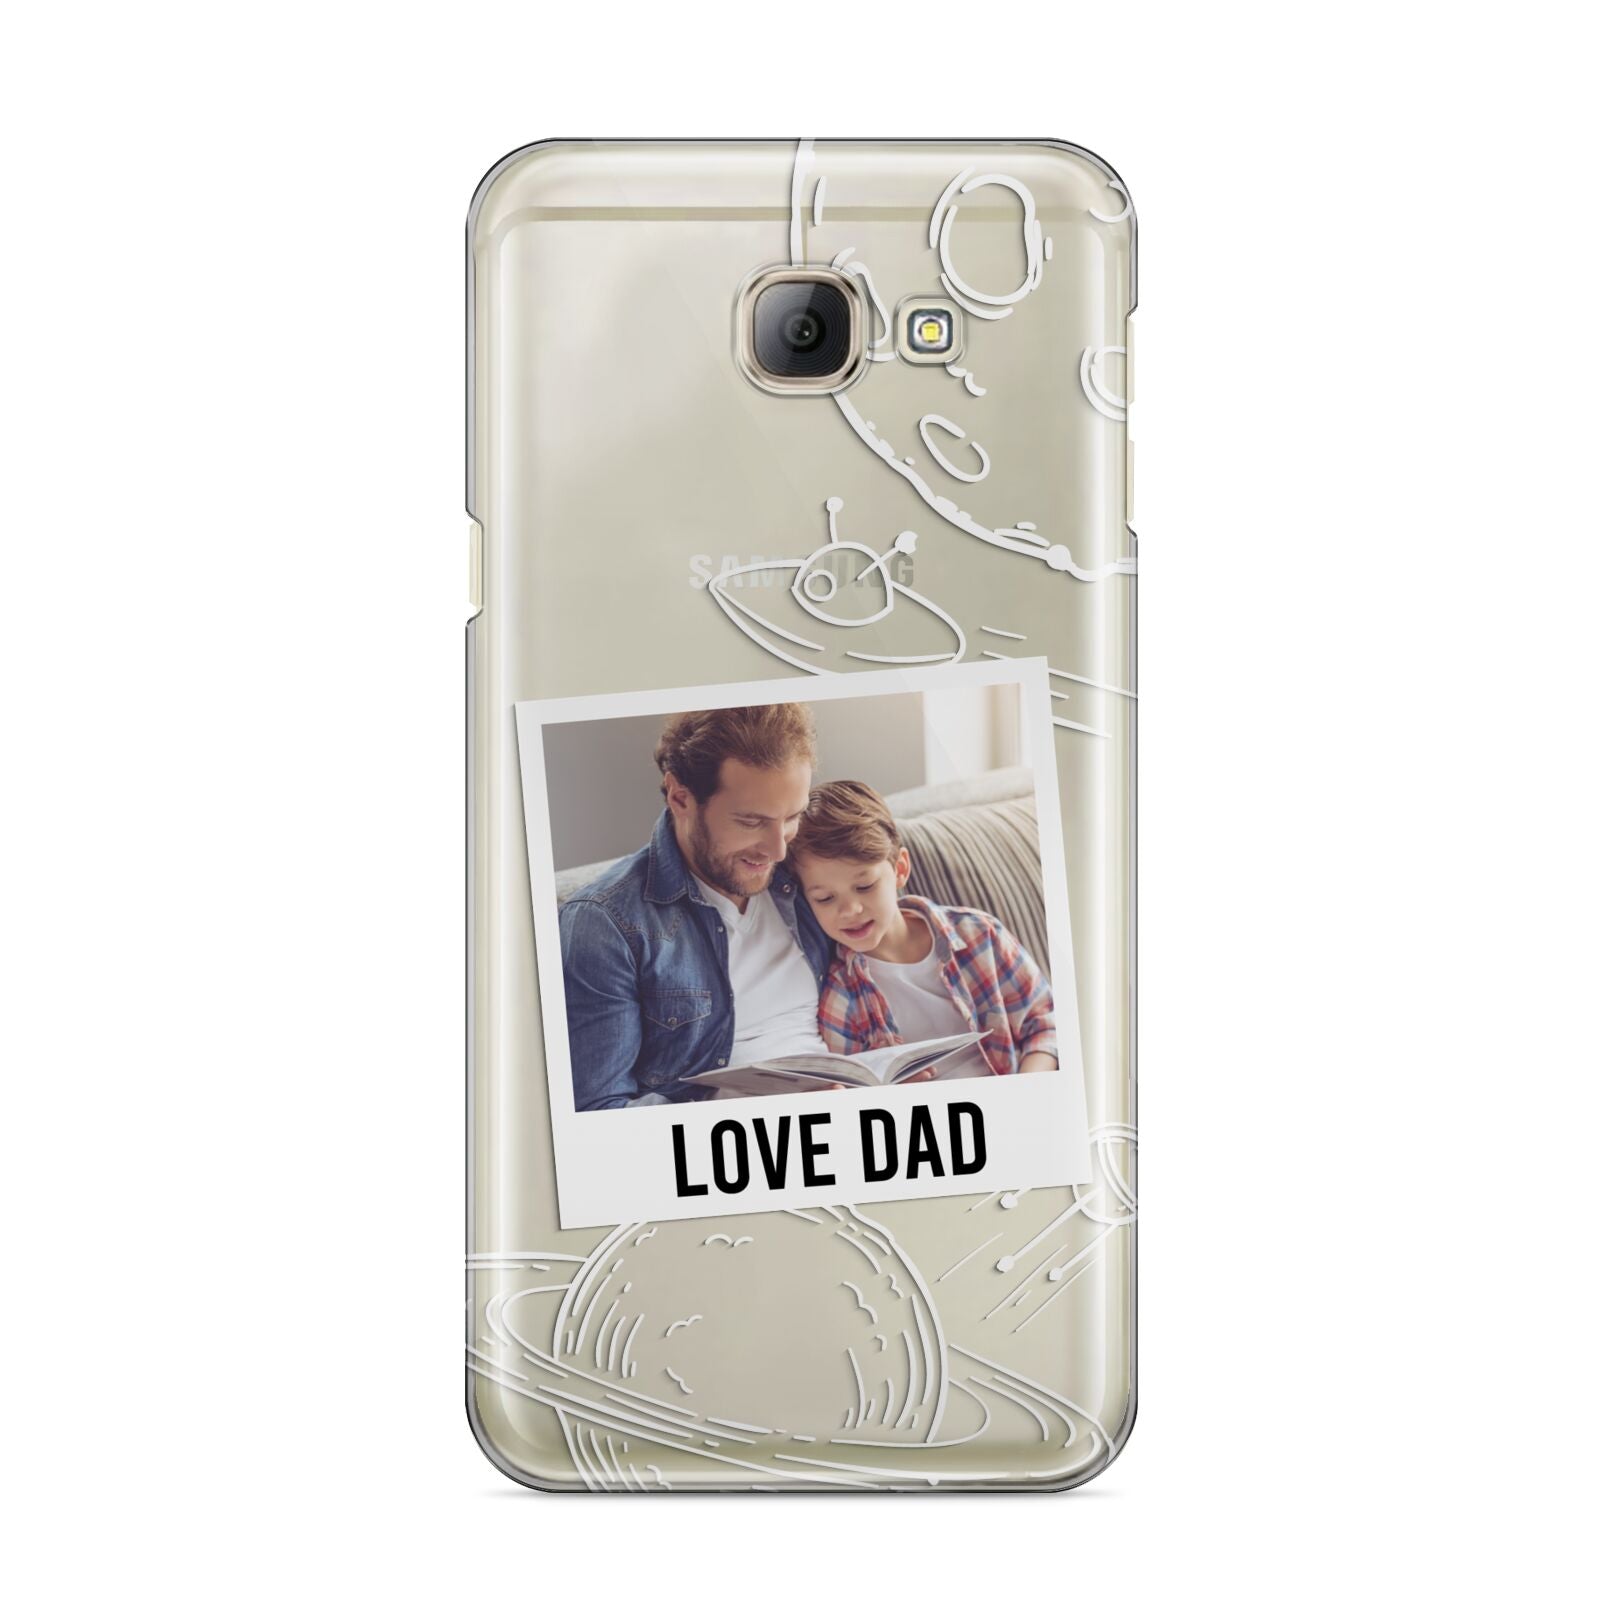 Personalised From Dad Photo Samsung Galaxy A8 2016 Case